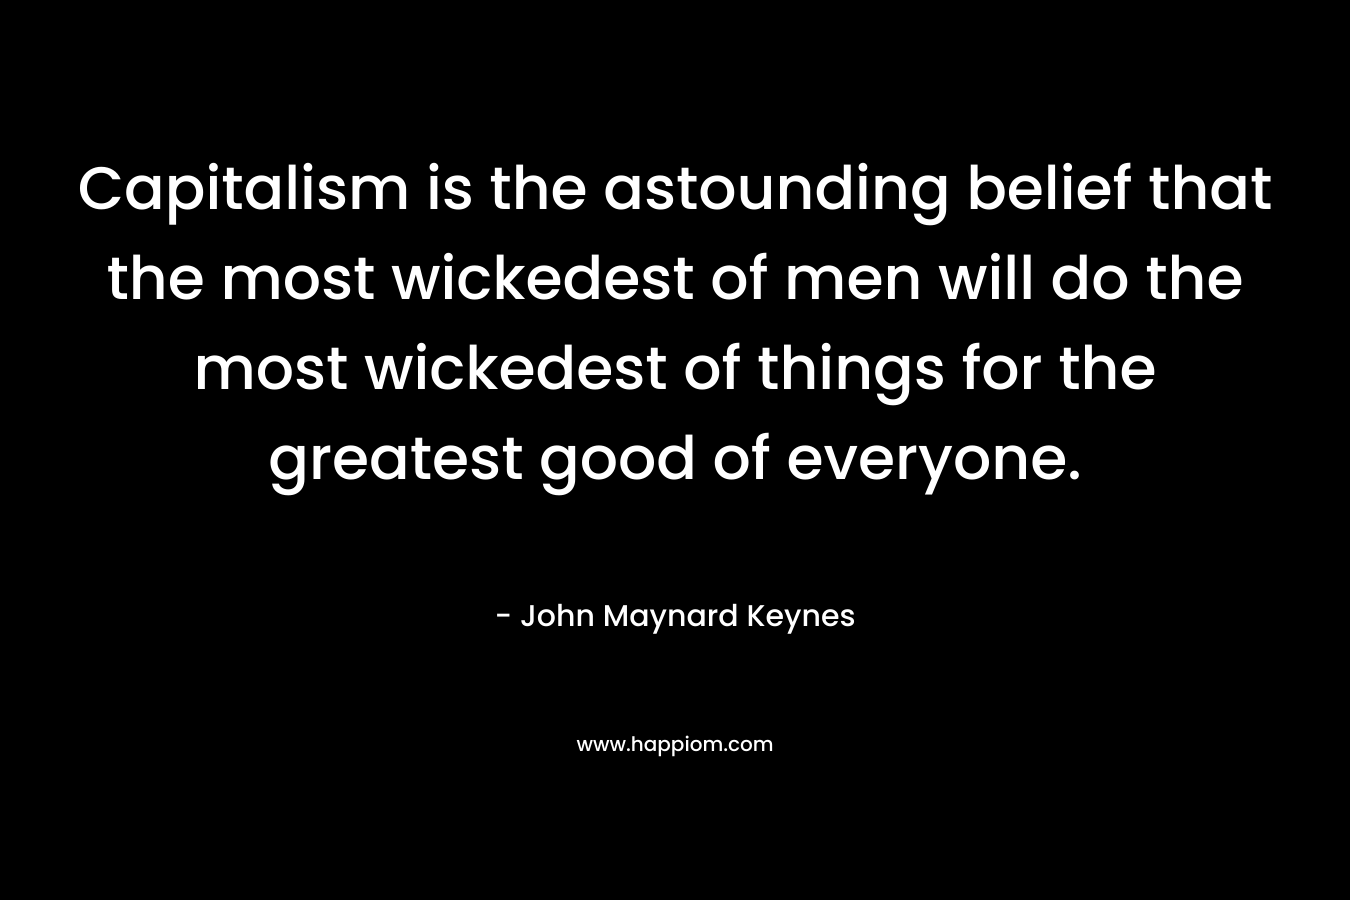 Capitalism is the astounding belief that the most wickedest of men will do the most wickedest of things for the greatest good of everyone. – John Maynard Keynes